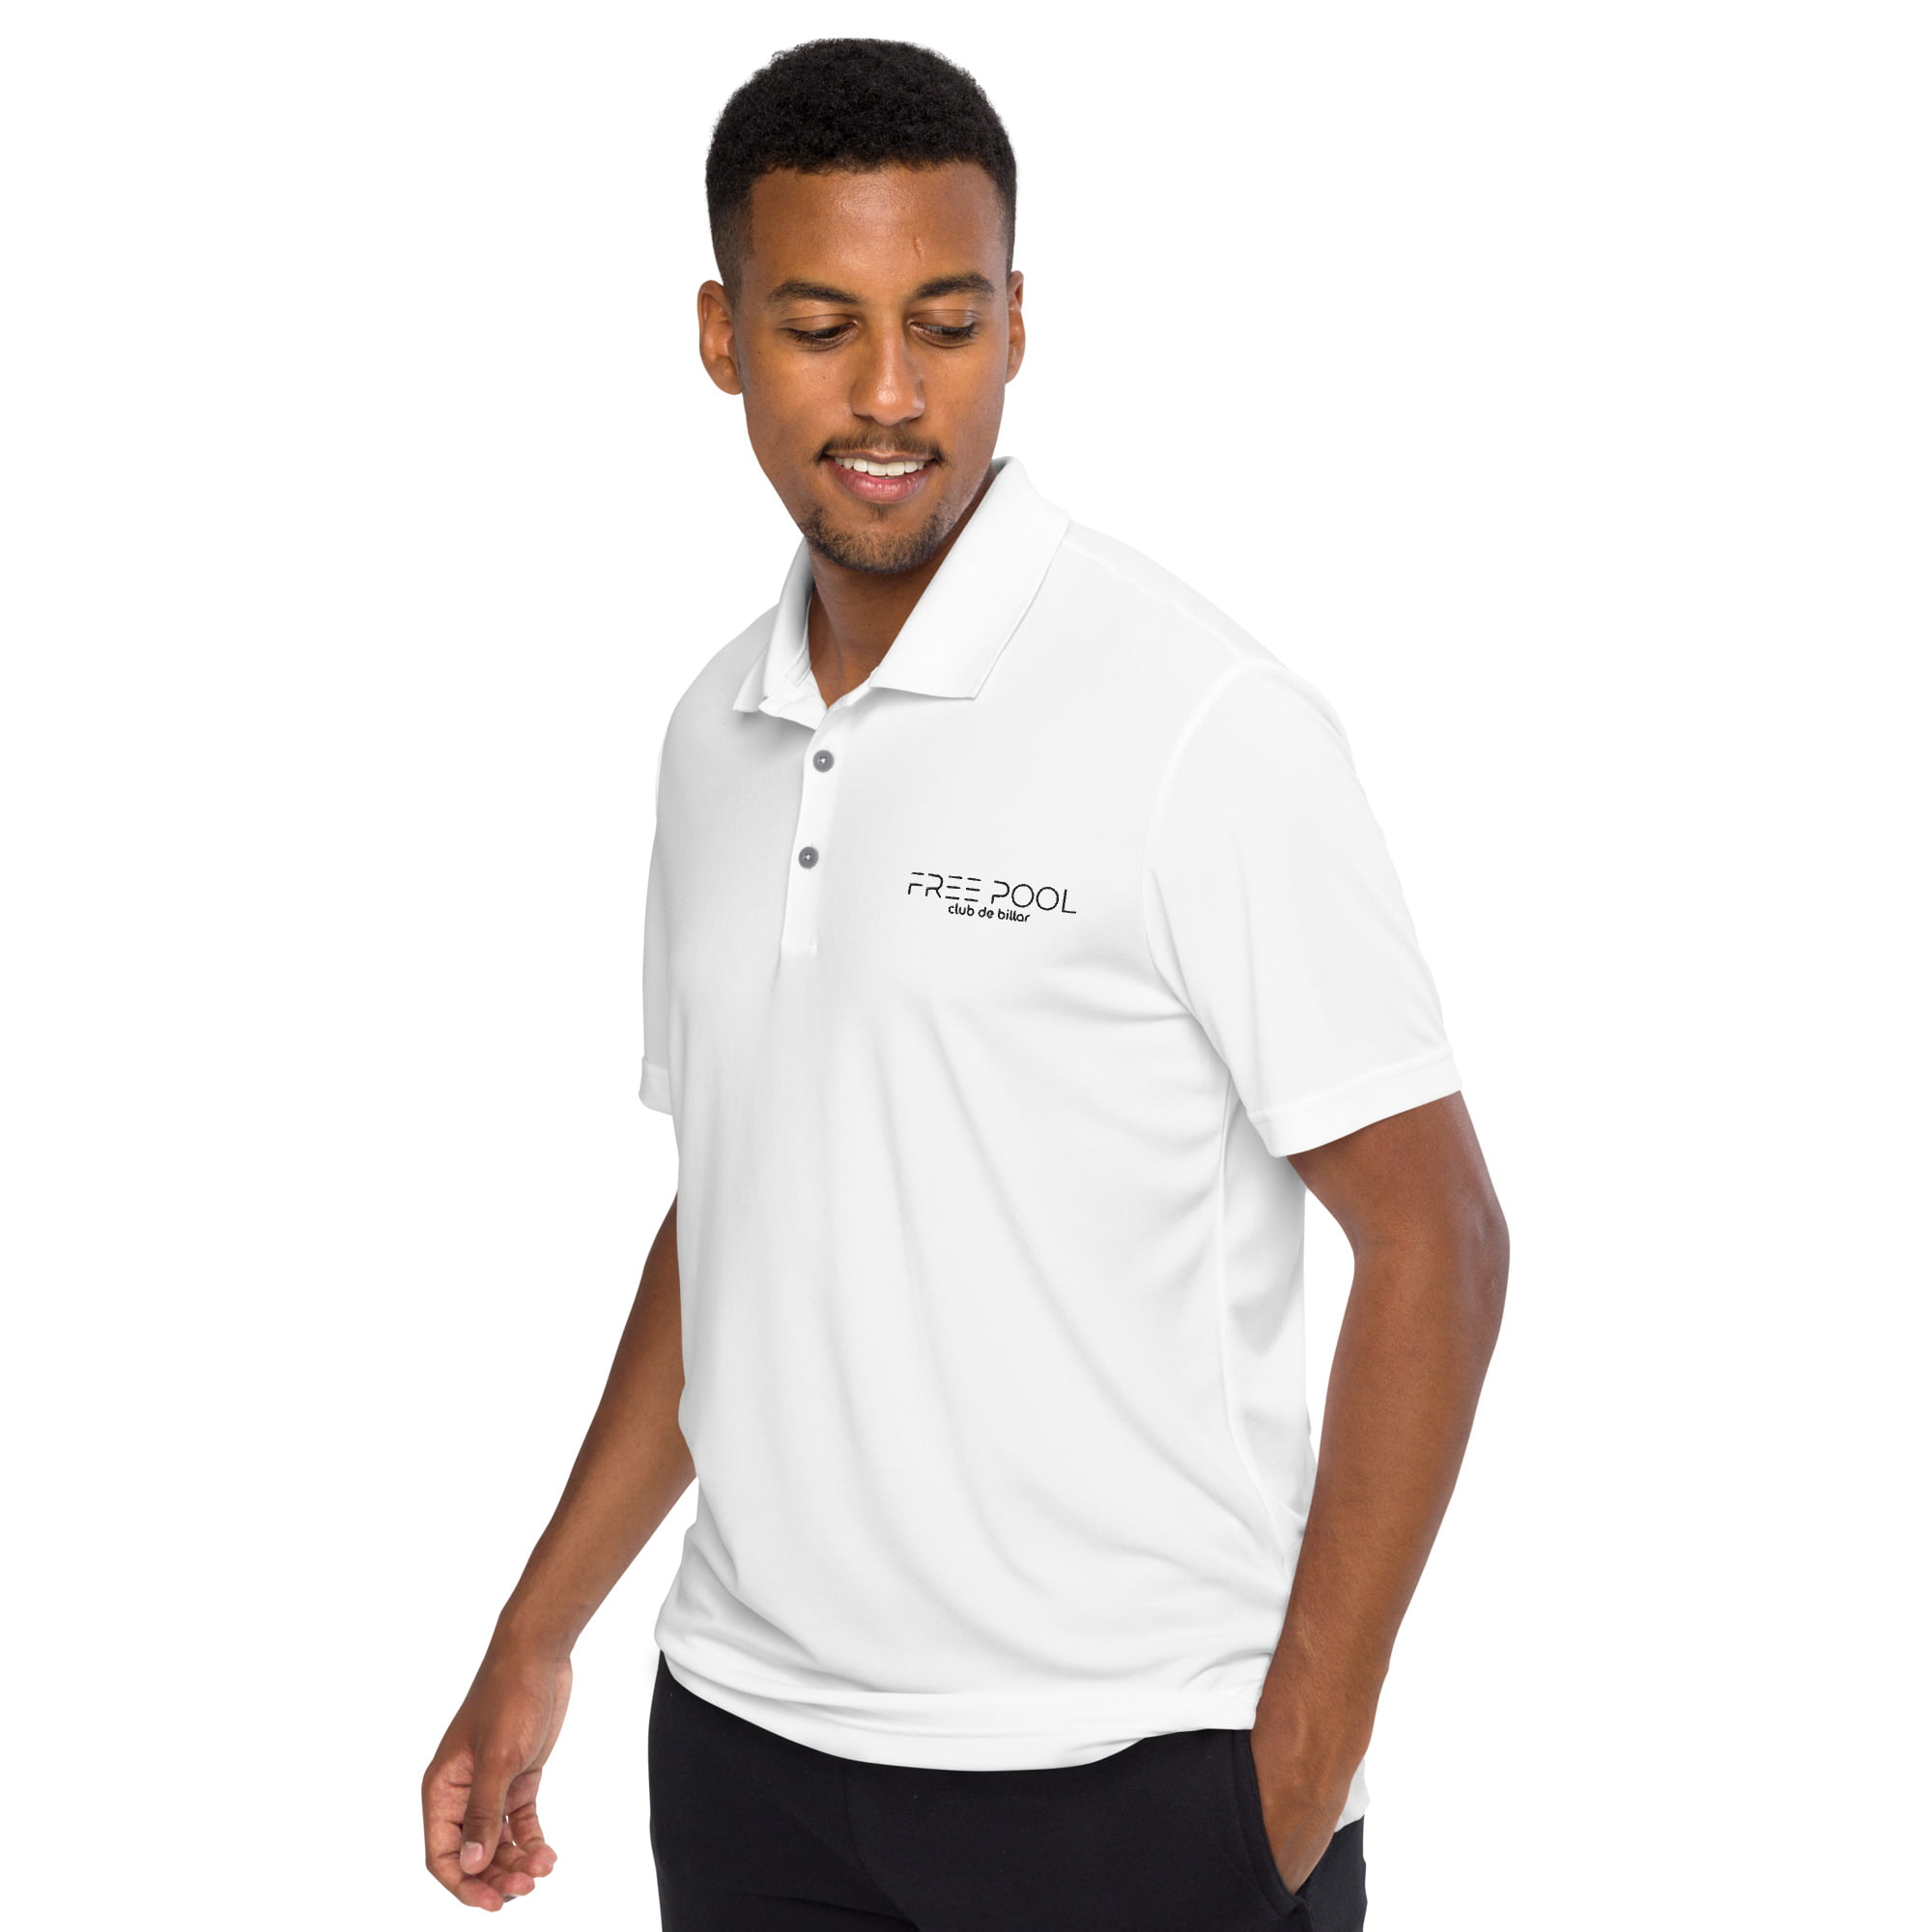 adidas-performance-polo-shirt-white-left-front-64864f4af40a8.jpg